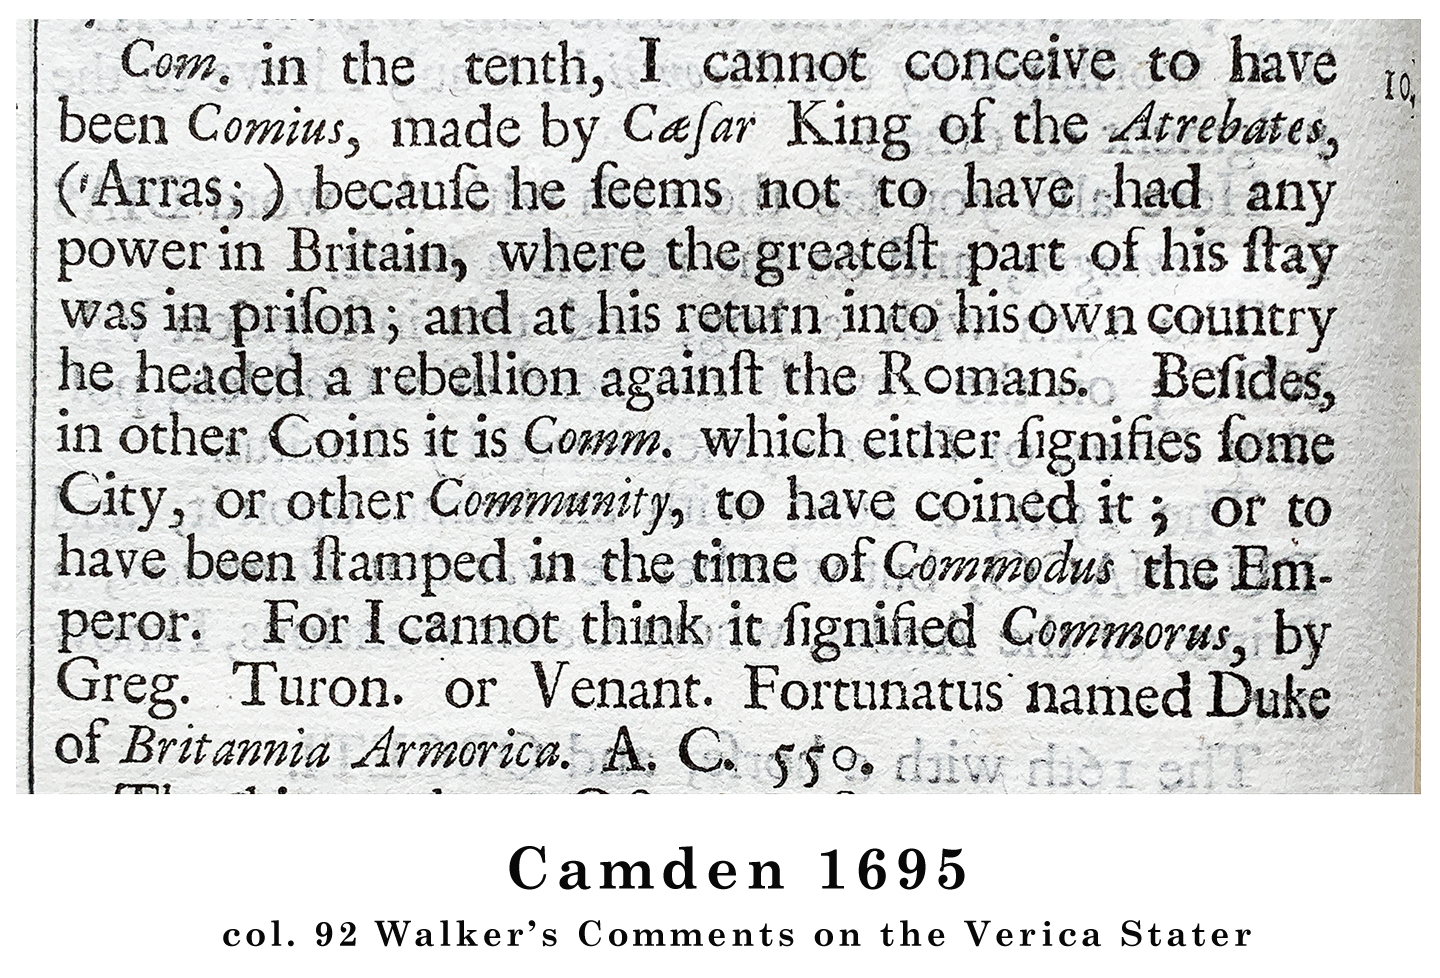 Camden 1695 Obadiah Walker's comments about the Verica stater